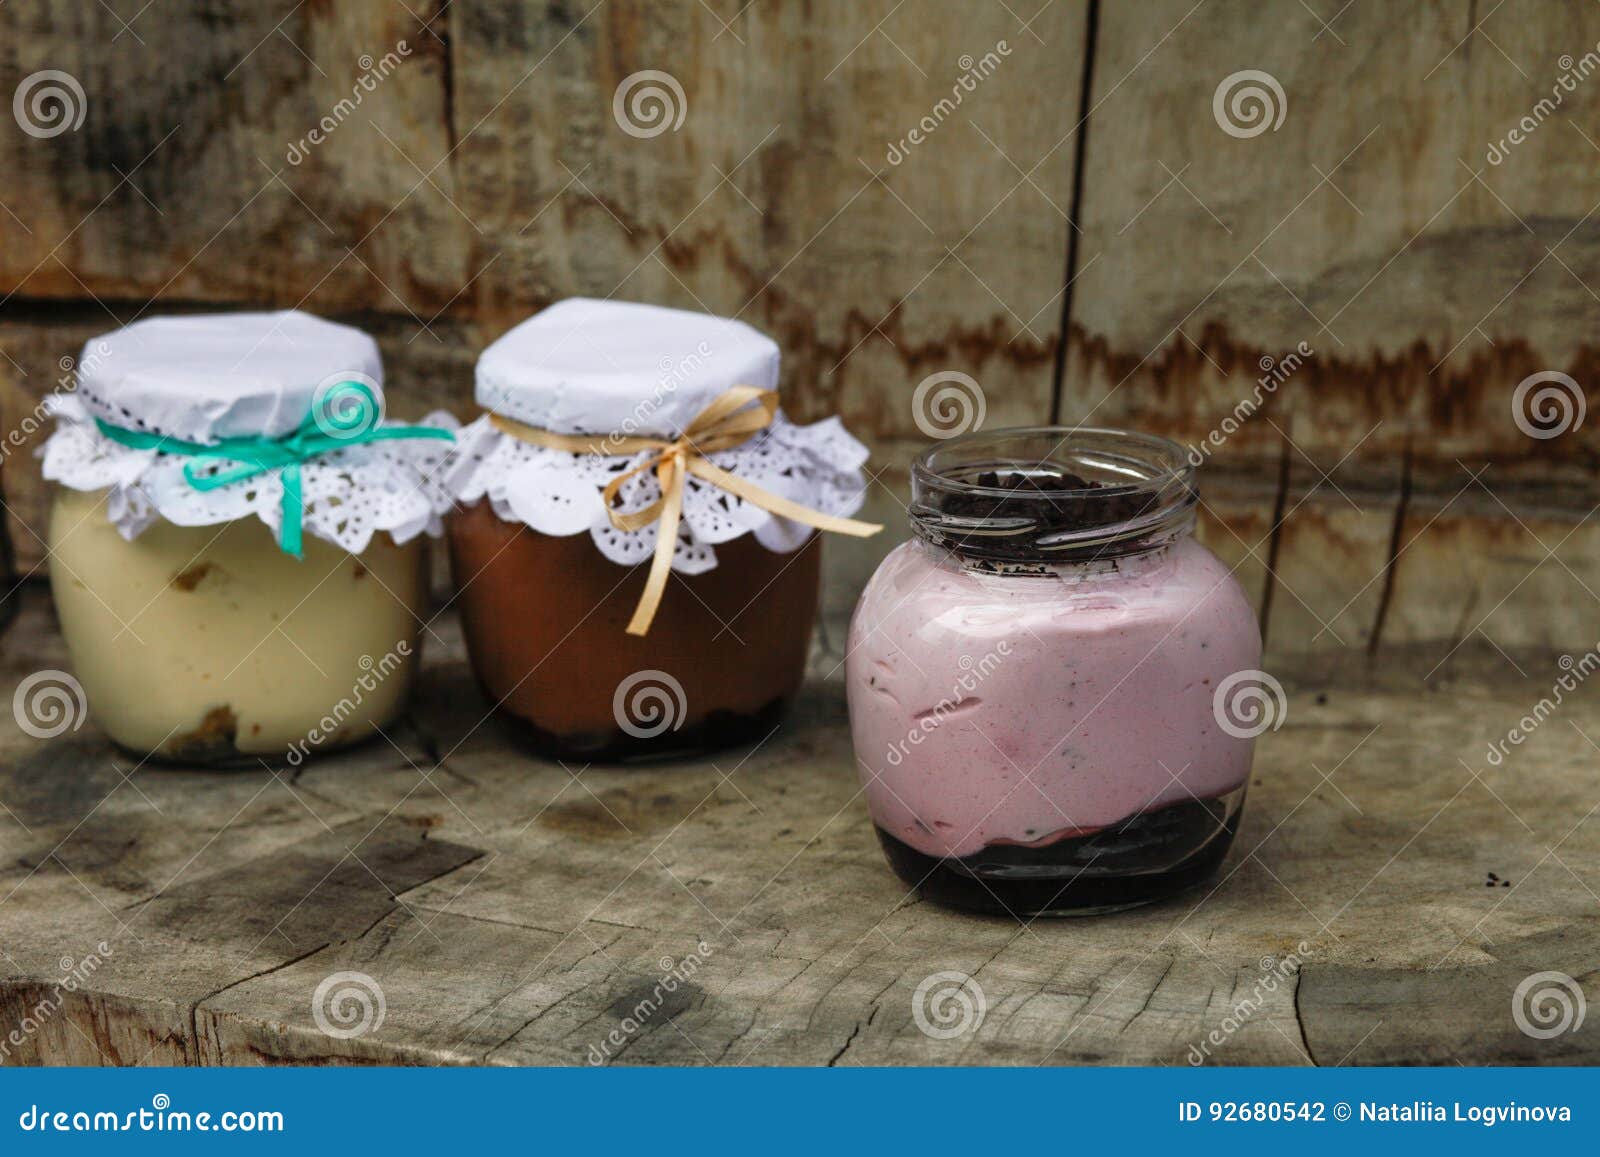 Creamy Dessert In A Small Glass Jars With Ribbon On A Wooden